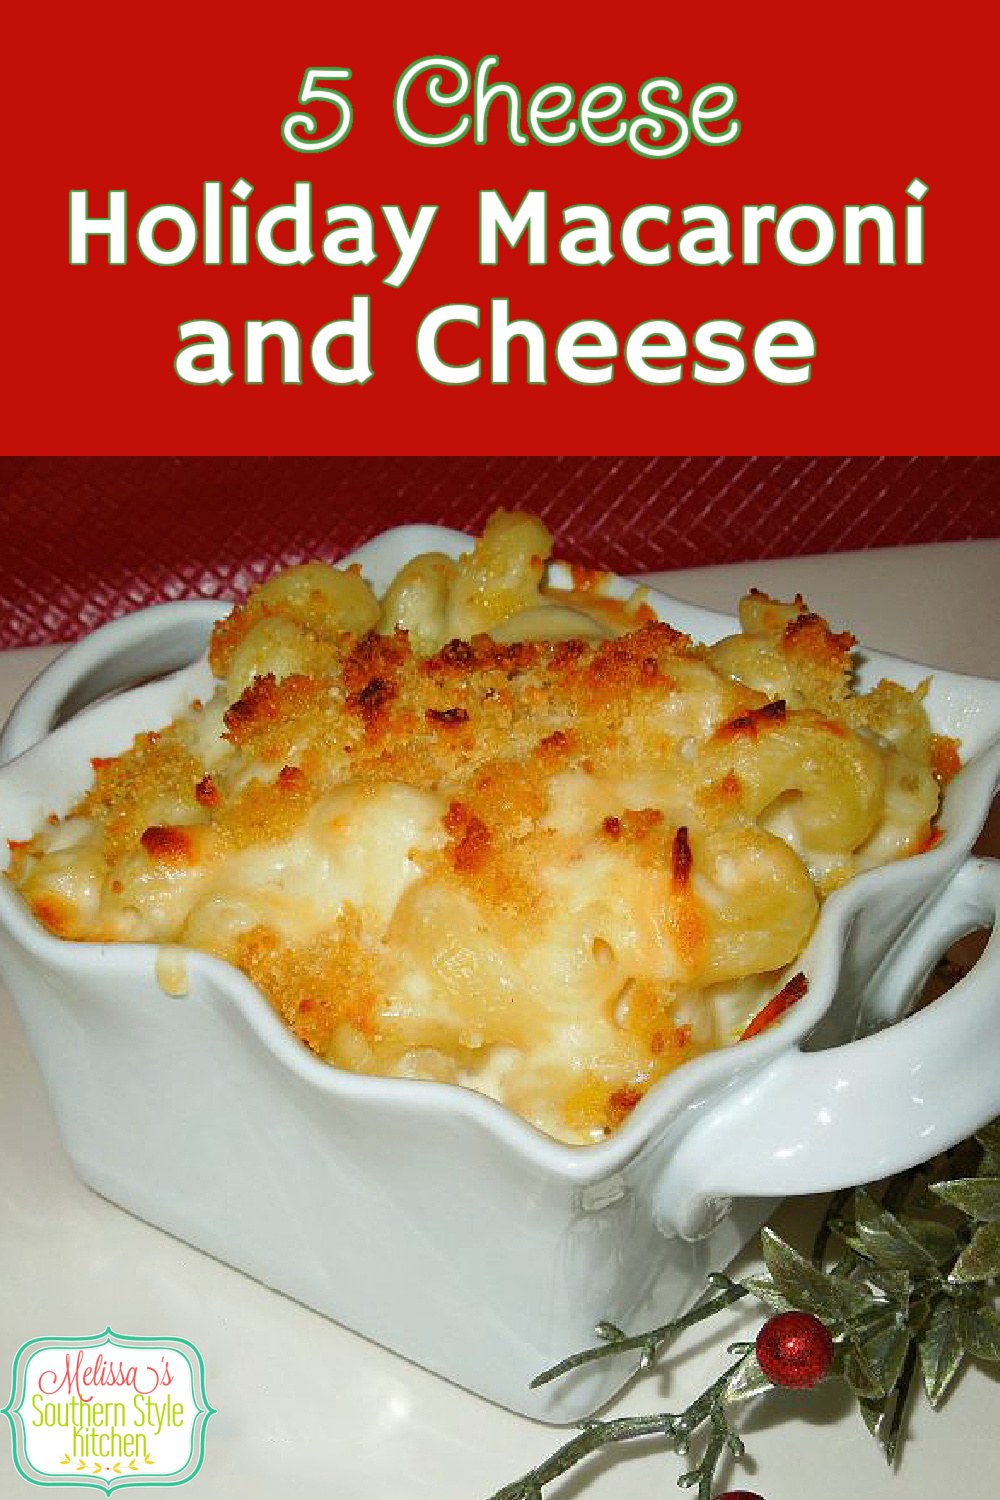 This 5 Cheese Holiday Macaroni and Cheese features a delicious blend of cheese that makes it a special dish for a special occasion #macaroniandcheese #macadncheese #cheese #pasta #casseroles #southernrecipes #southernfood #bestmacandcheese #macaroni